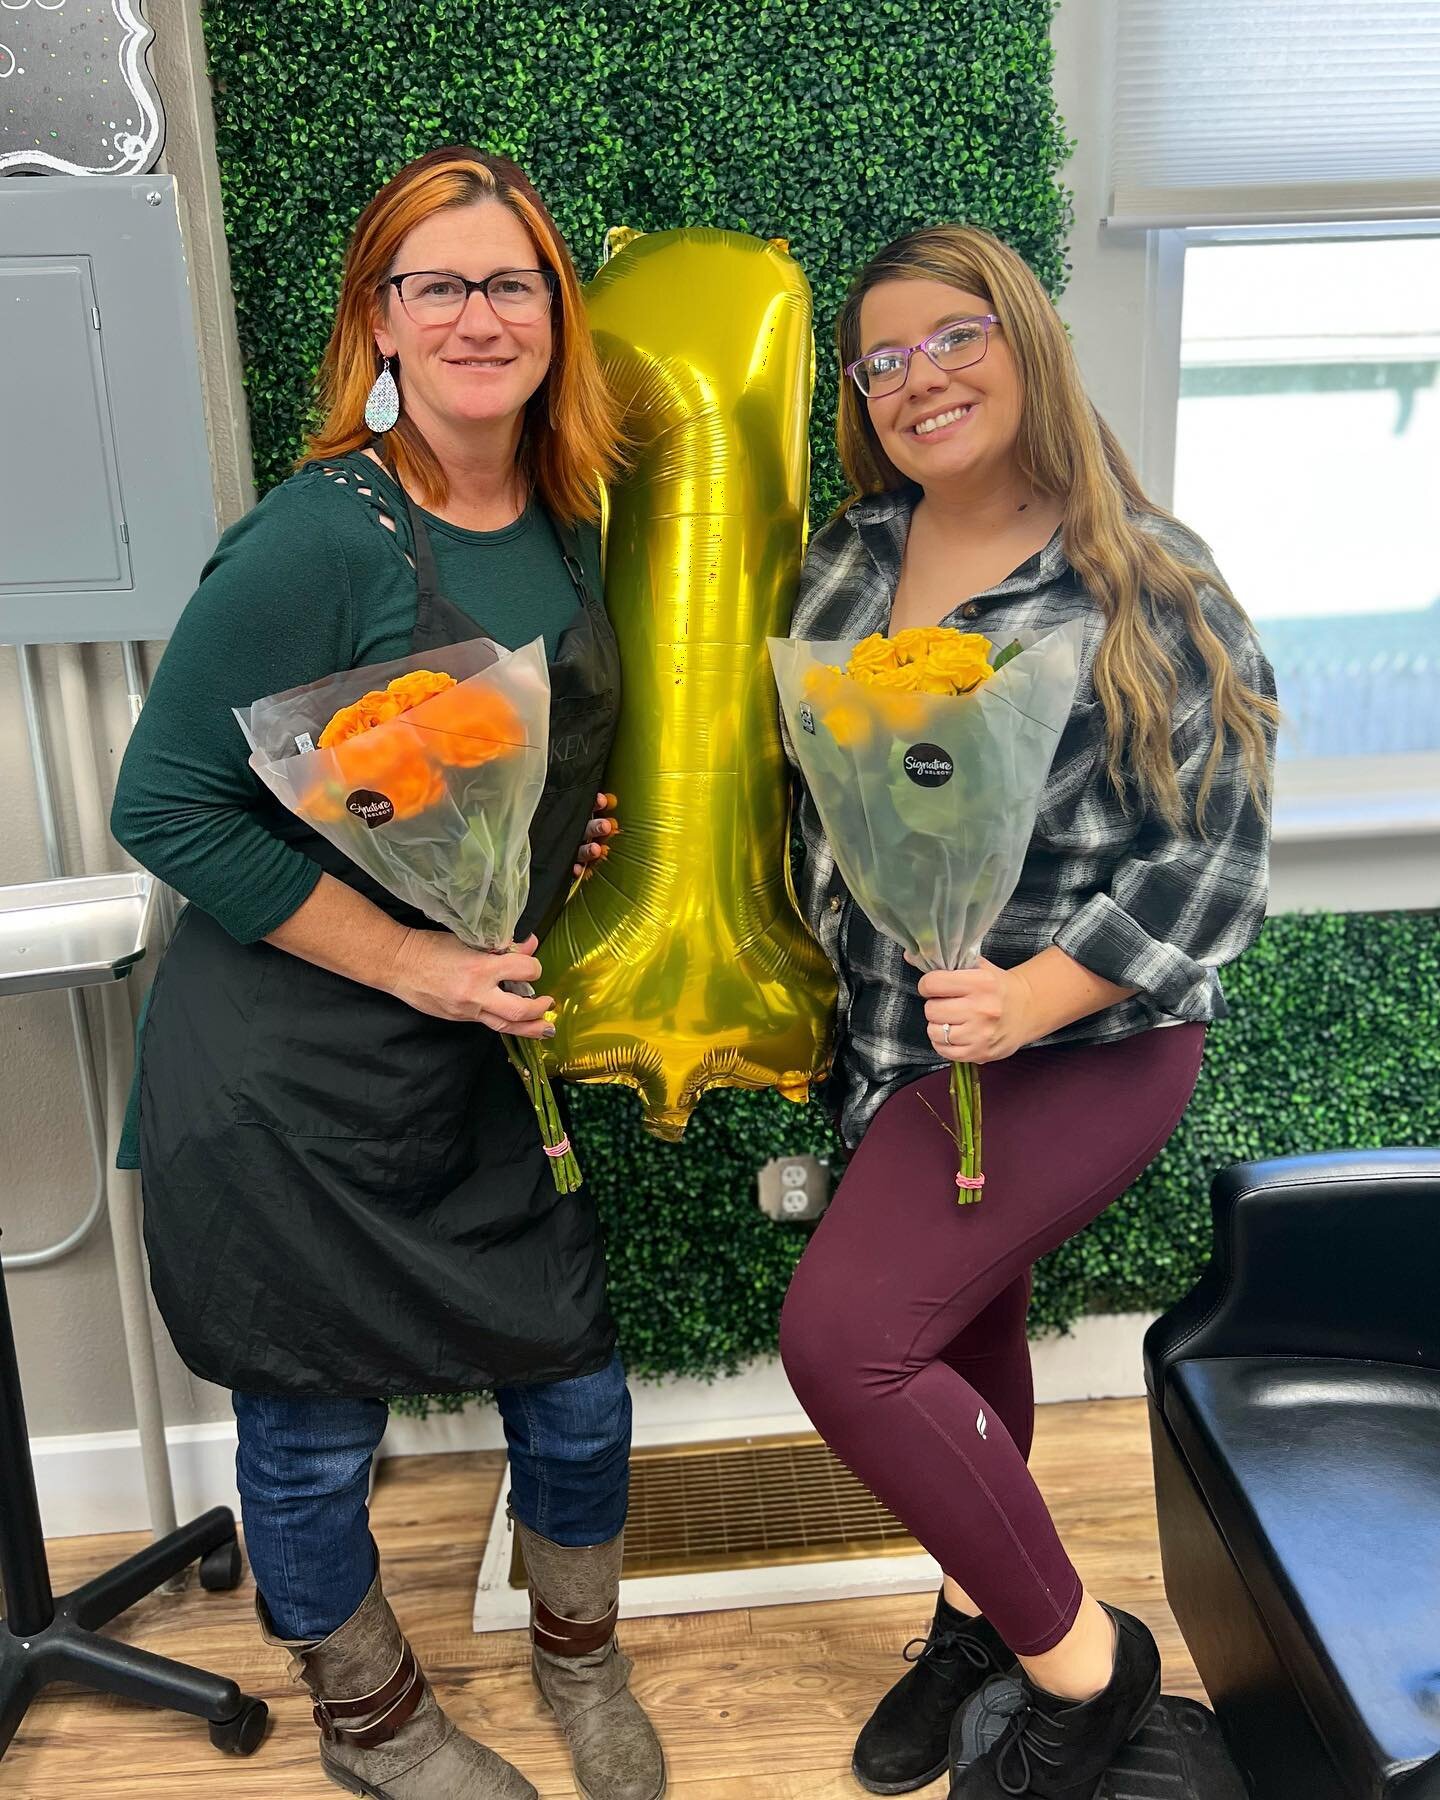 Kris and EJ have officially been promoted from associates and earned their Level 1 stylist certification! 🤍 We&rsquo;re so proud of how far they&rsquo;ve come! 

Book your dream hair now! 🌿

📱 307-287-7818
Online booking -&gt; Link in Bio
📍Cheyen